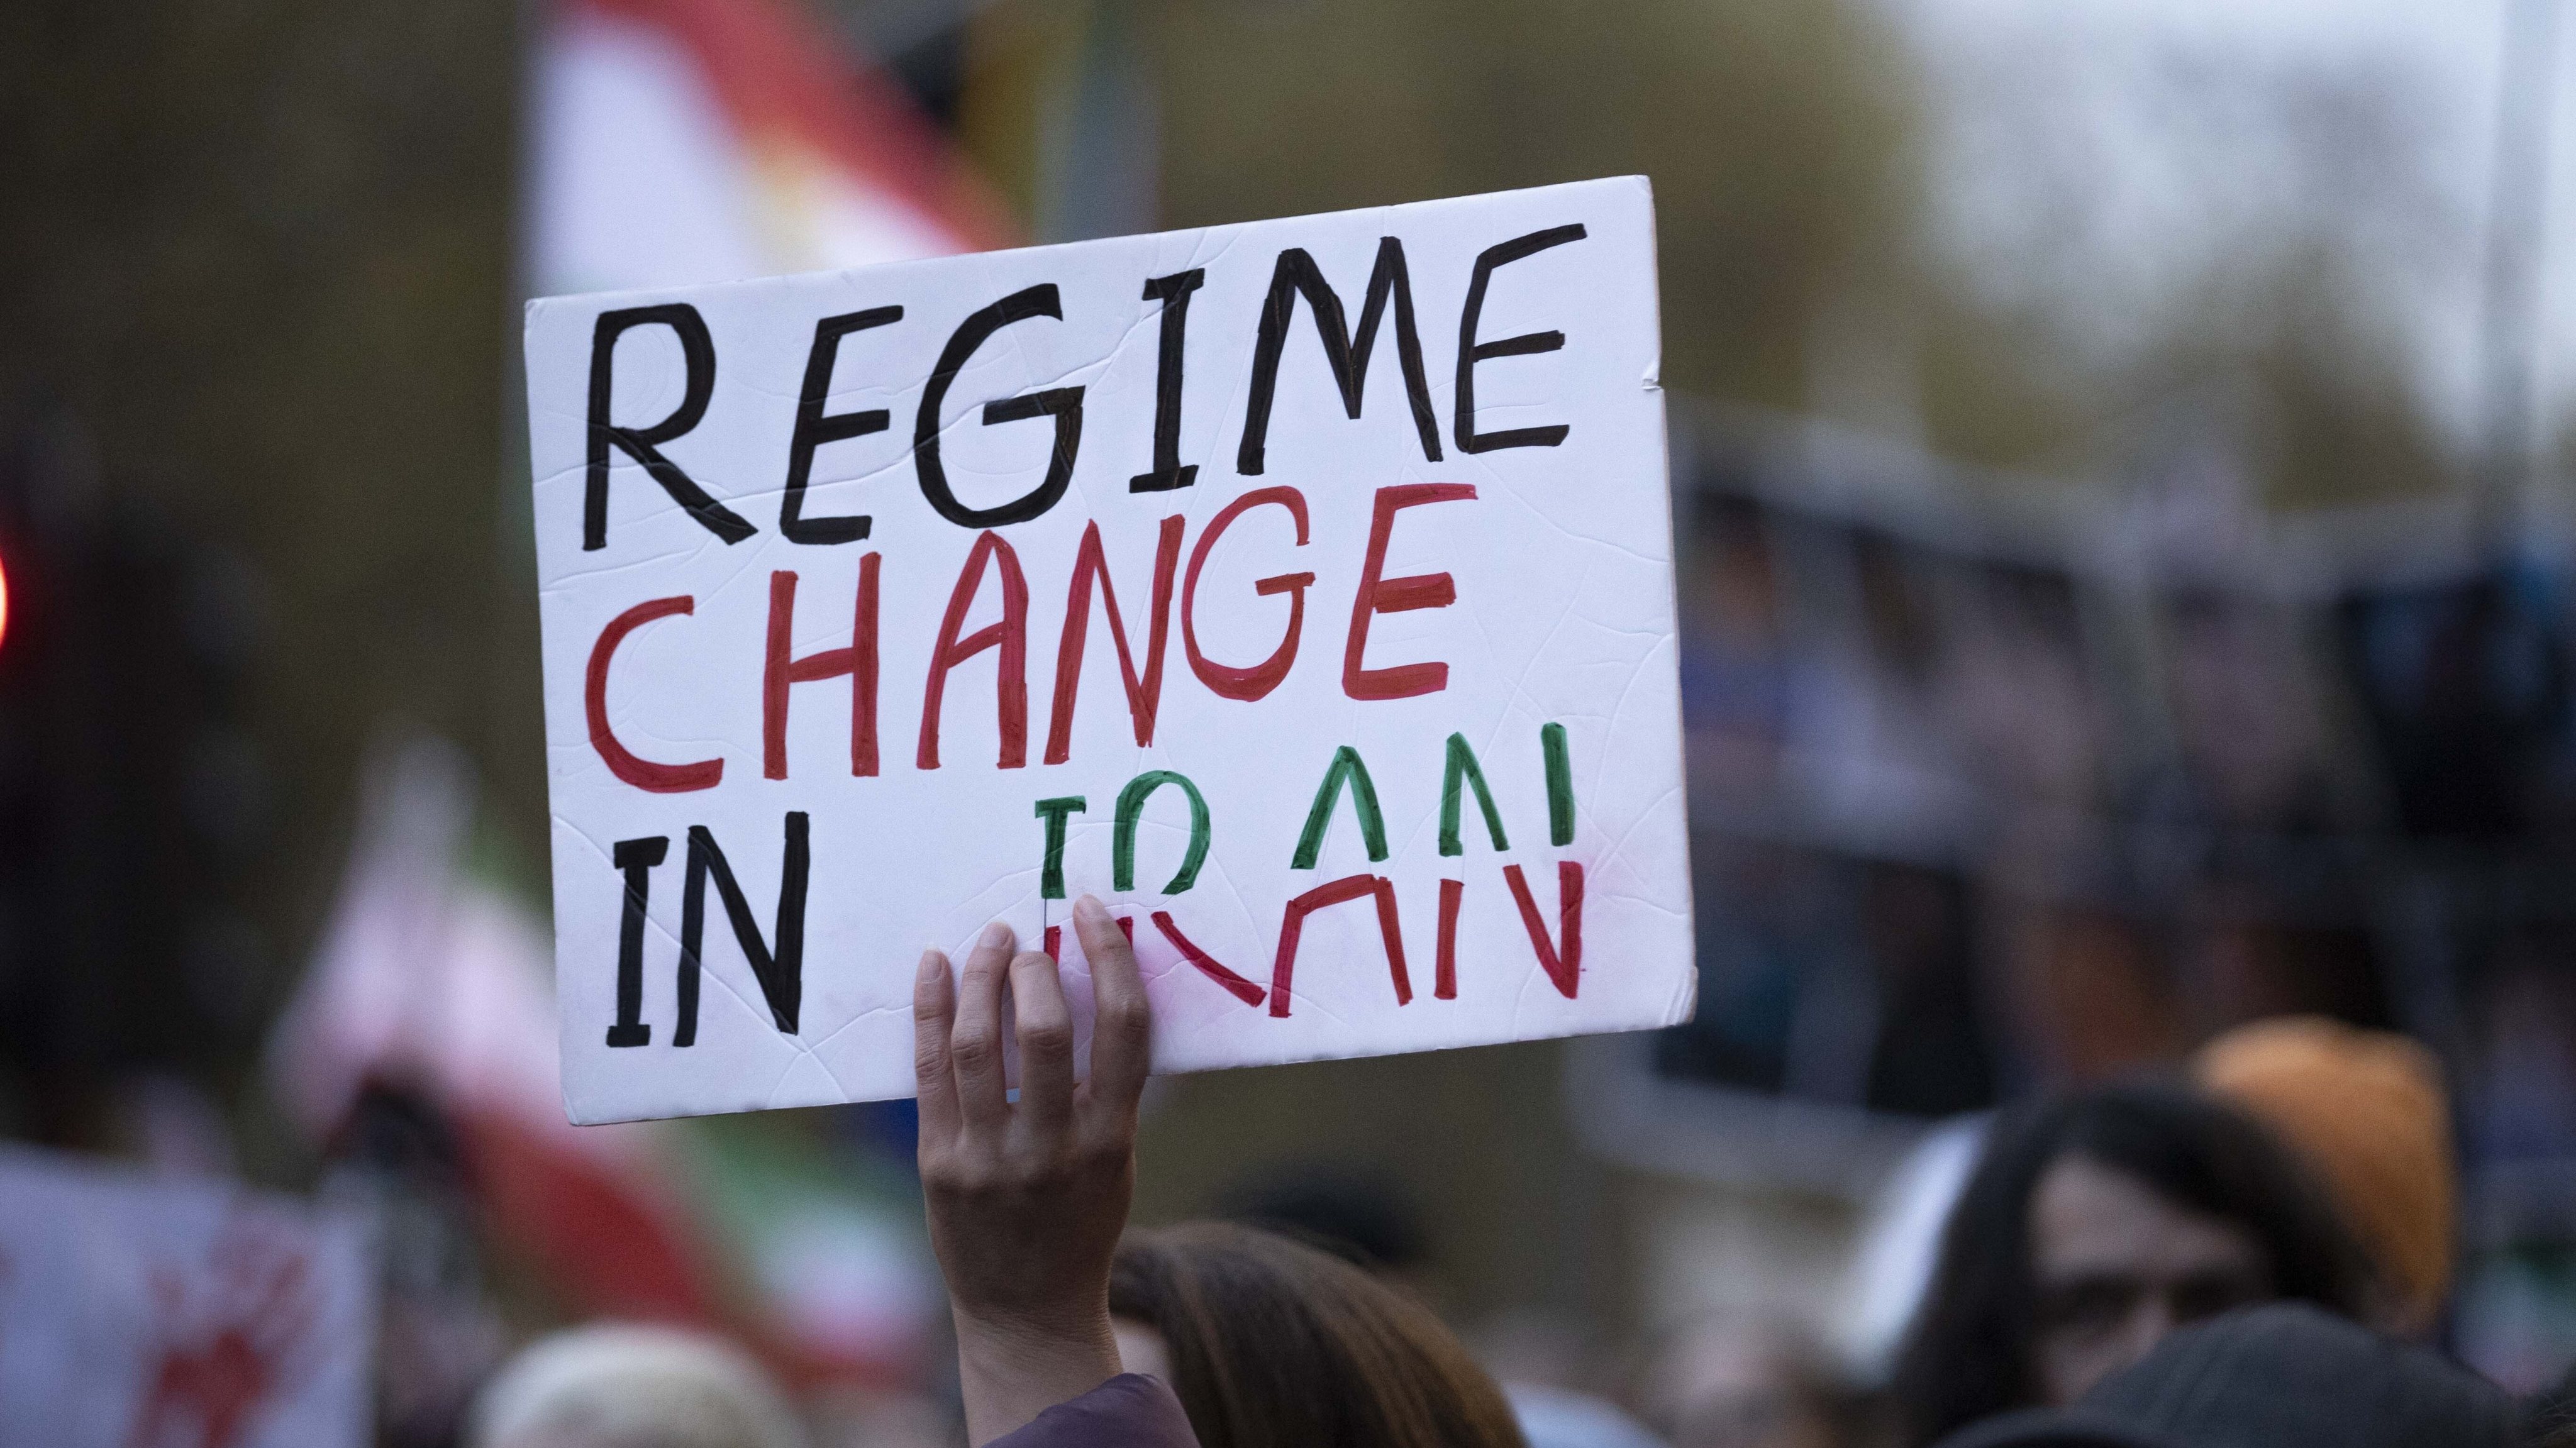 March in London in support of the demonstrations that started in Iran